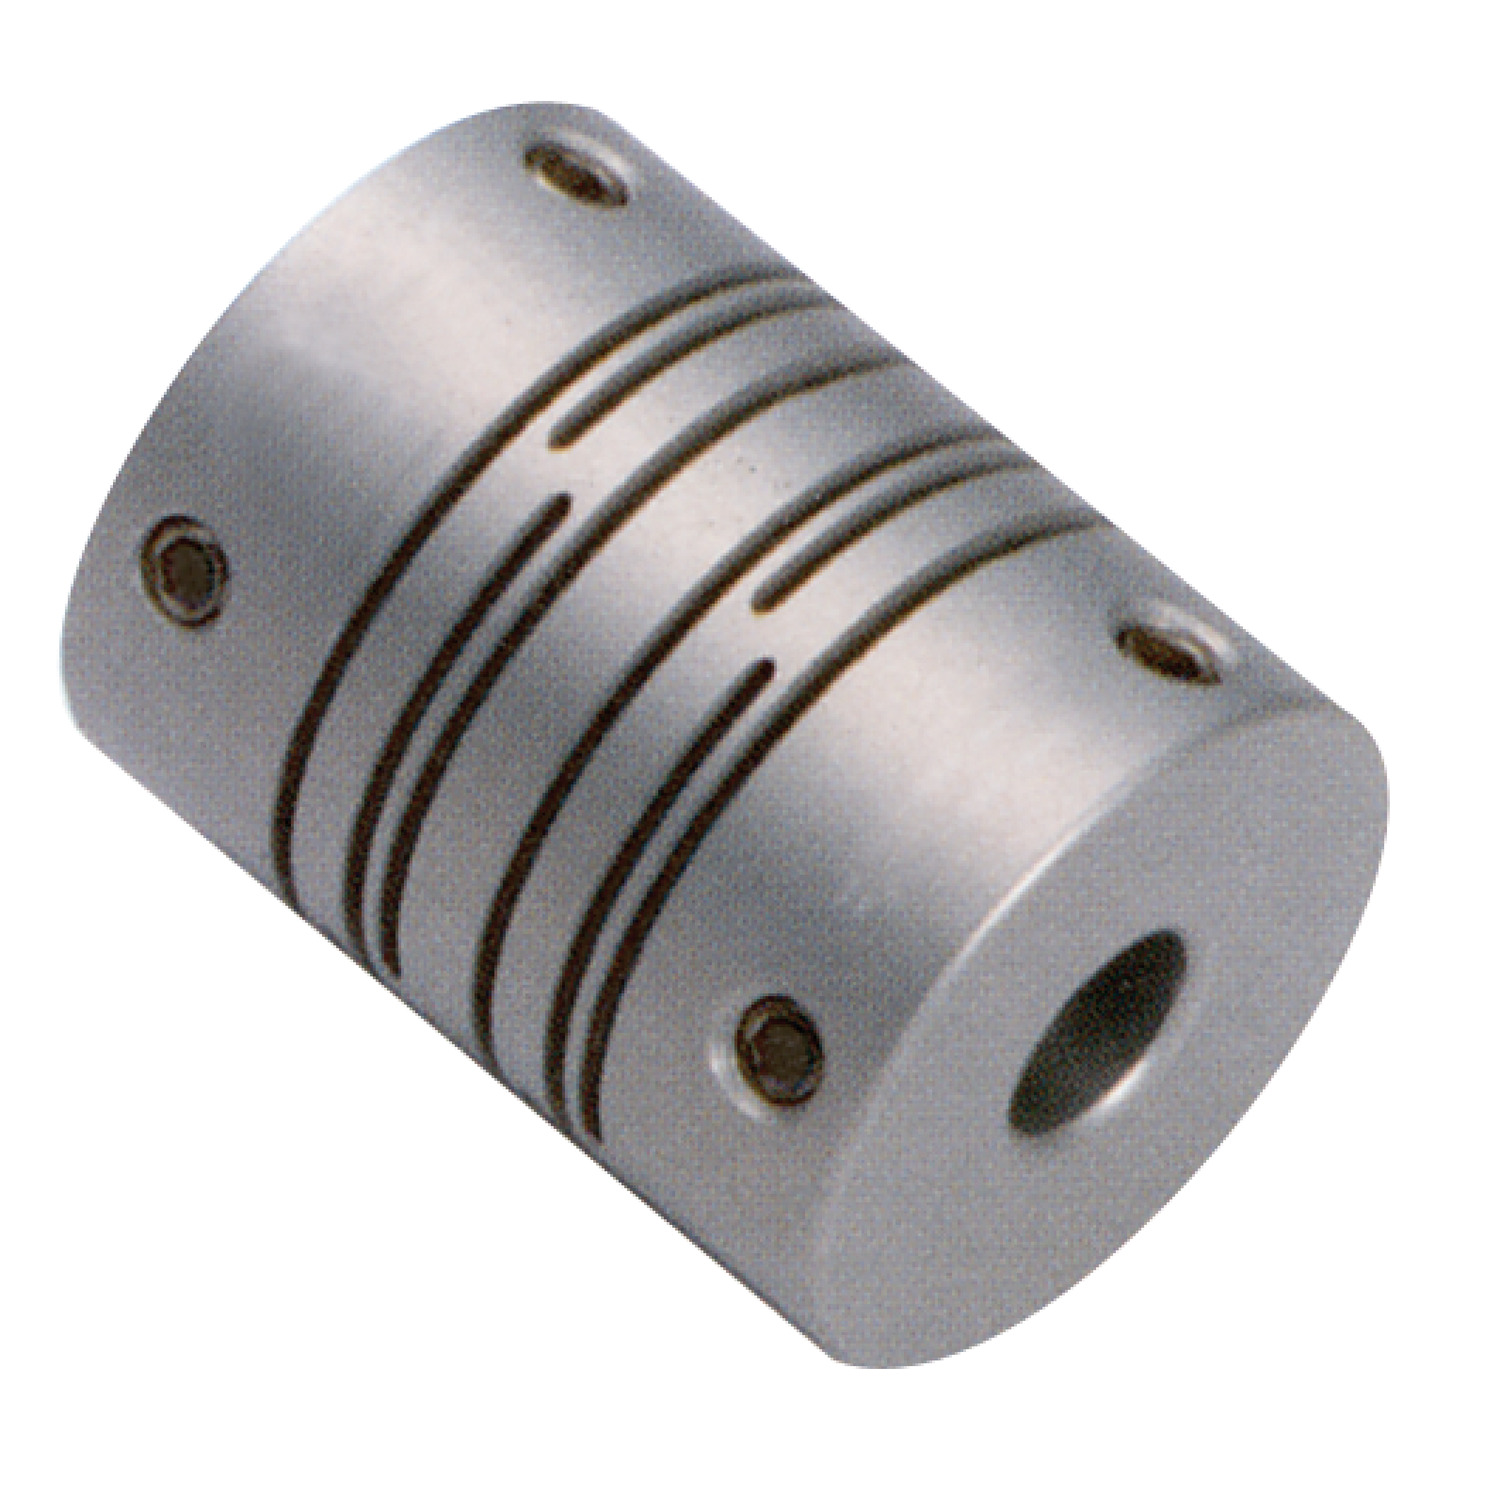 Product R3003, Beamed Coupling - six beam stainless steel, set screw type / 